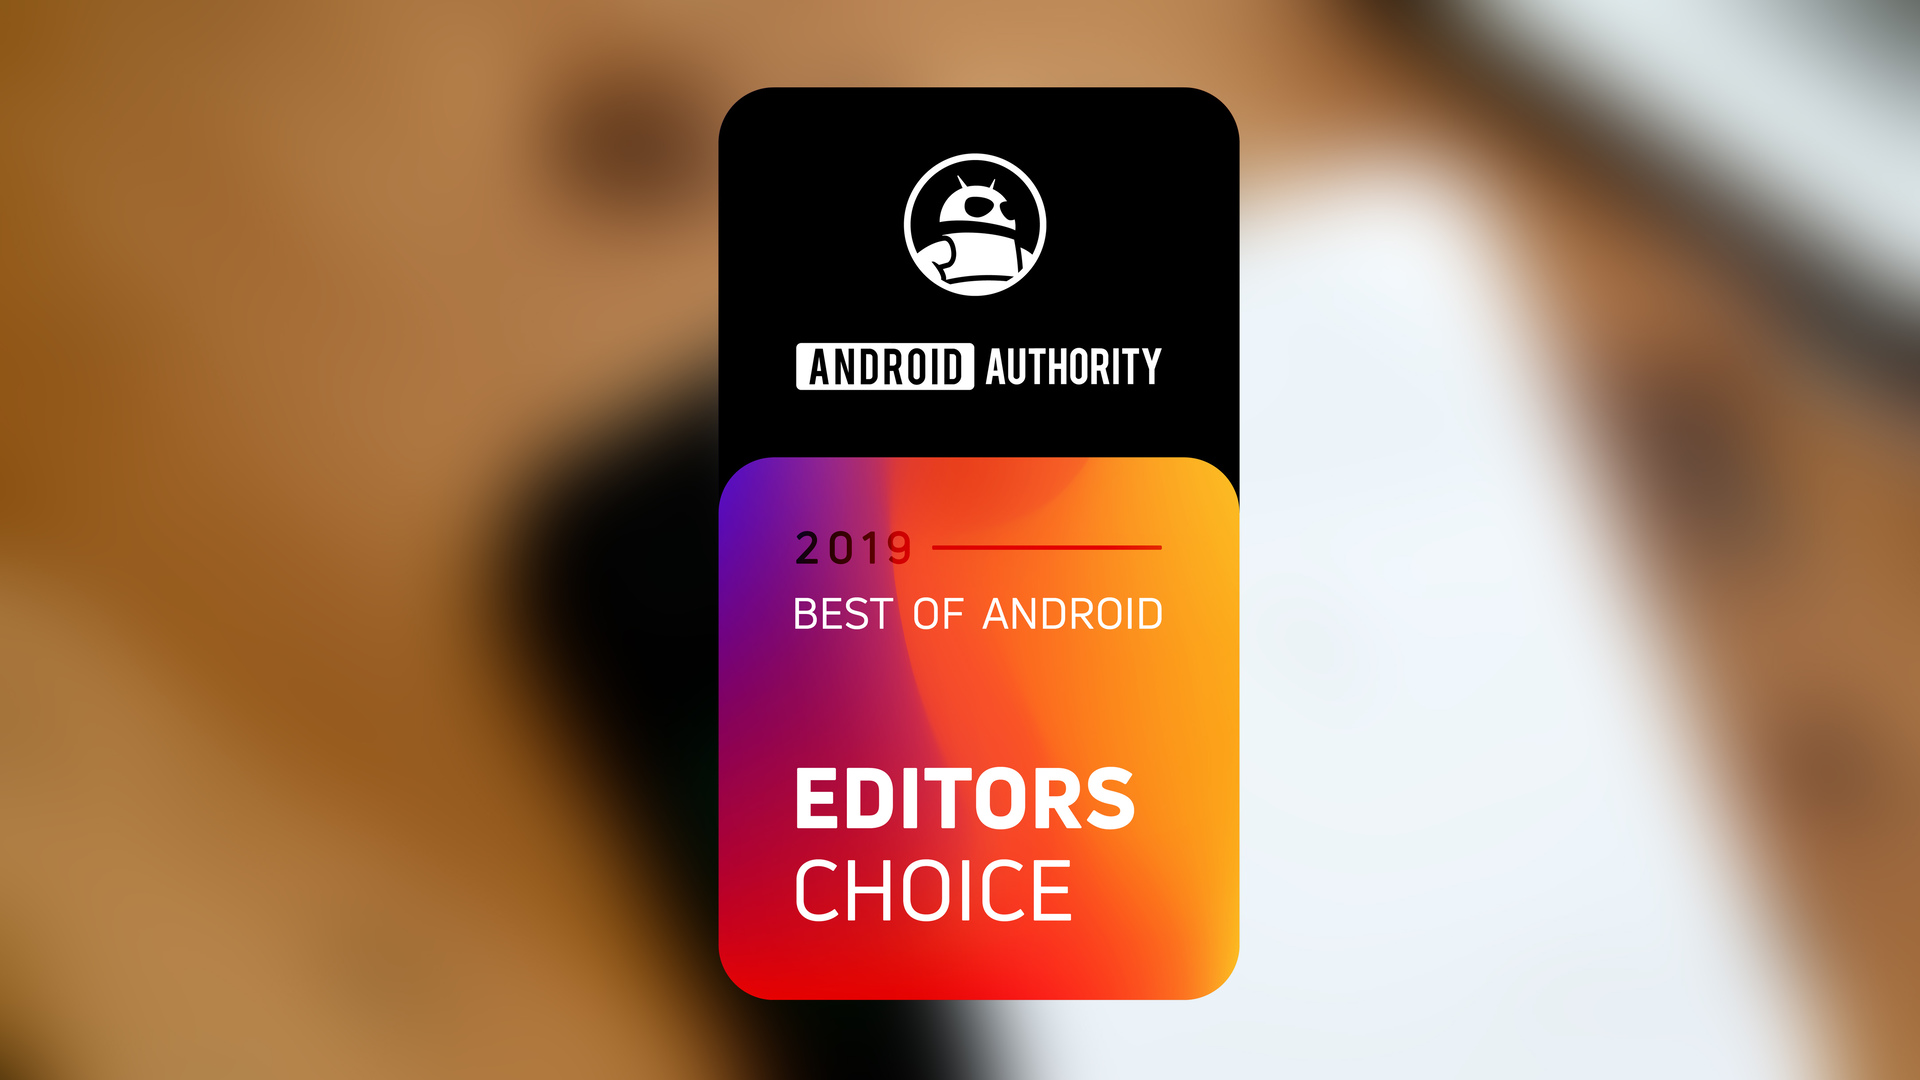 BEST OF ANDROID EDITORS CHOICE